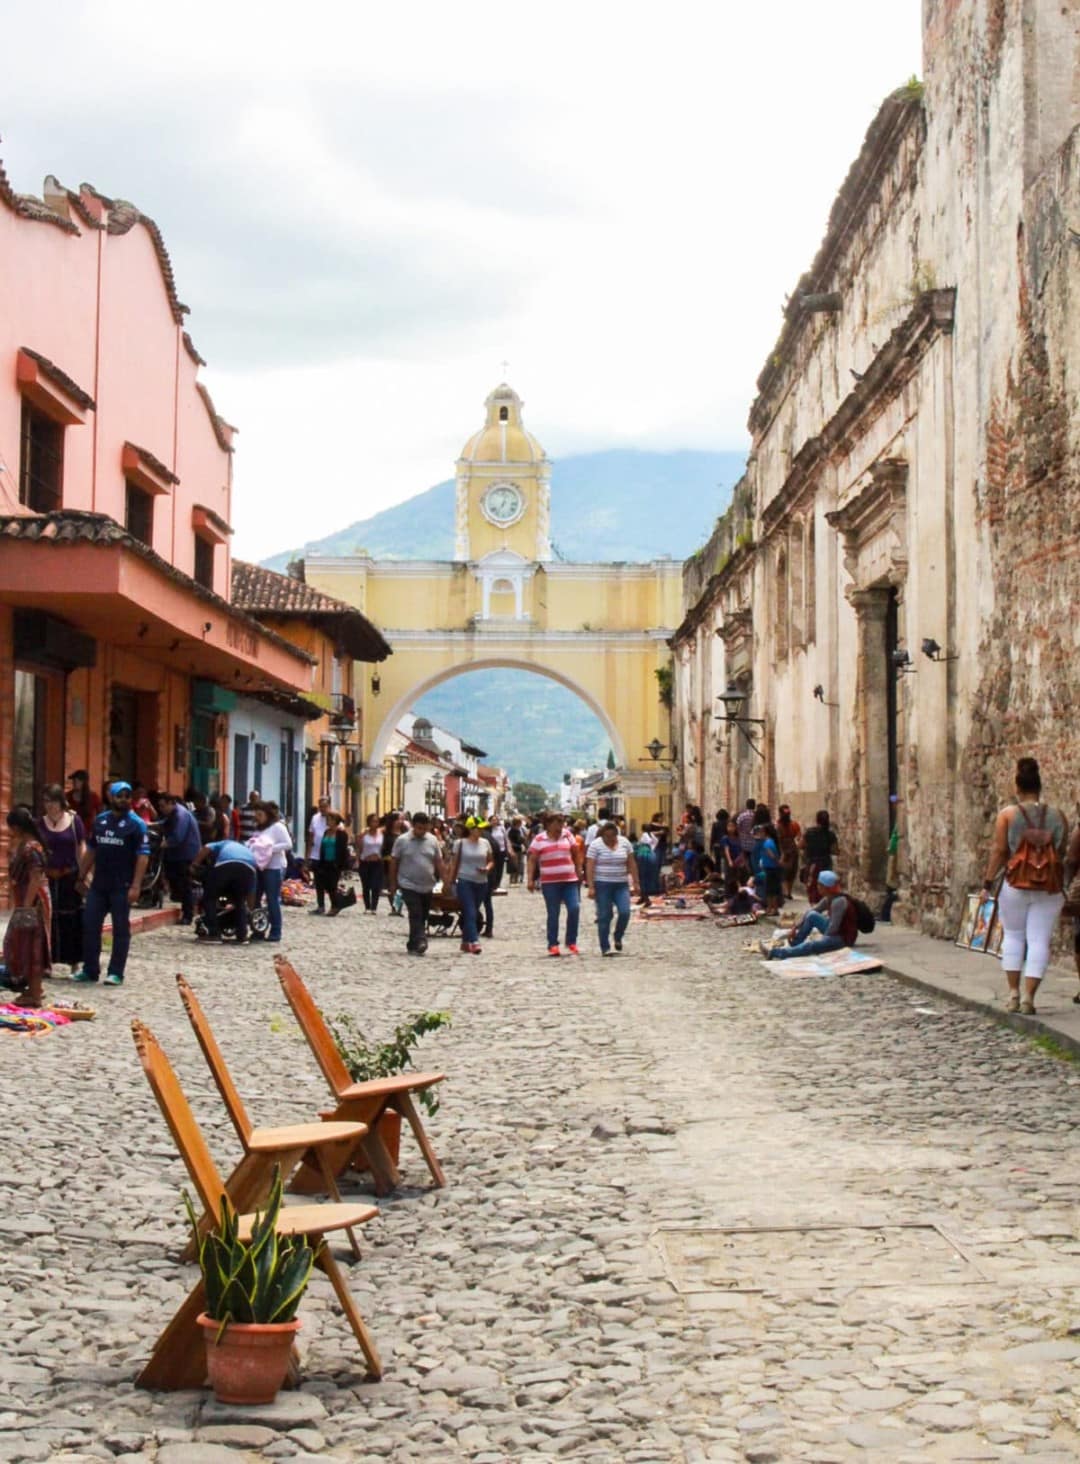 Photo diary of the charming town of Antigua in Guatemala, via www.livelikeitstheweekend.com